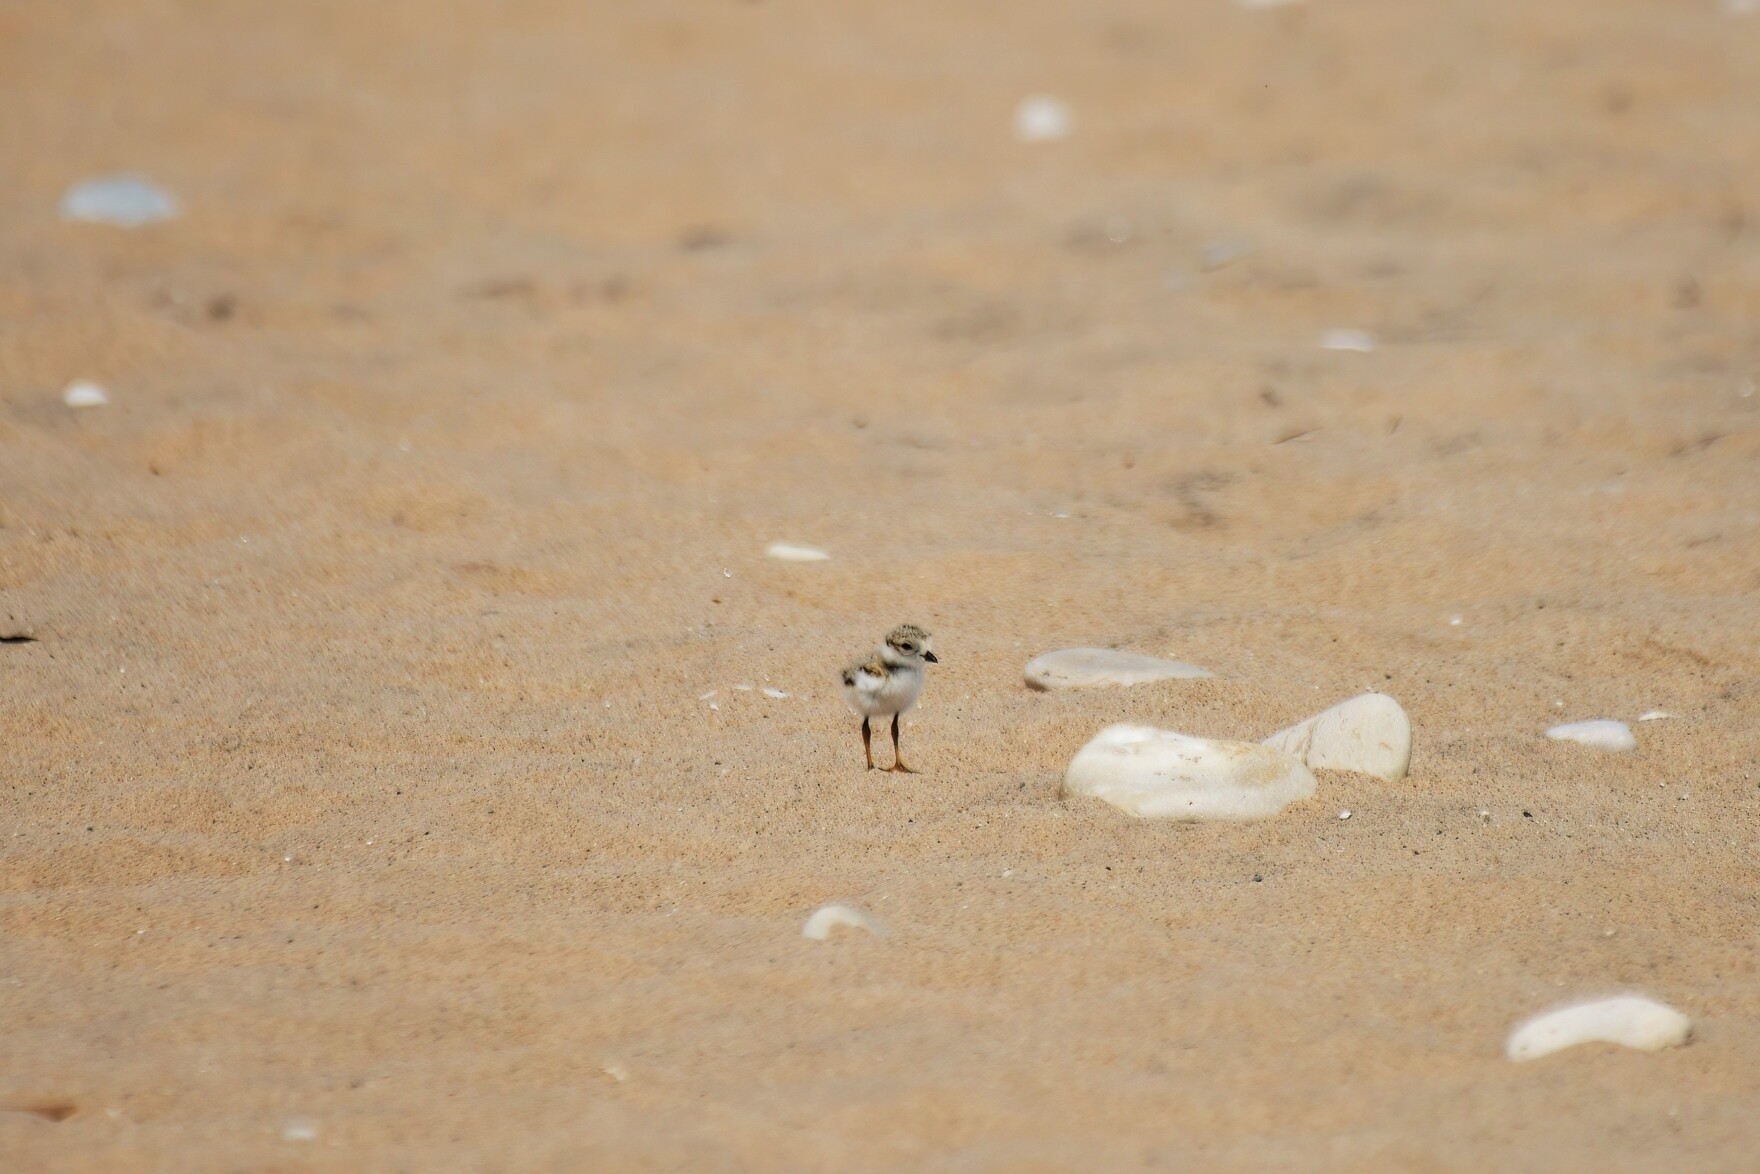 a small plover stands on the sand.  the framing makes it look tiny compared to its surroundings